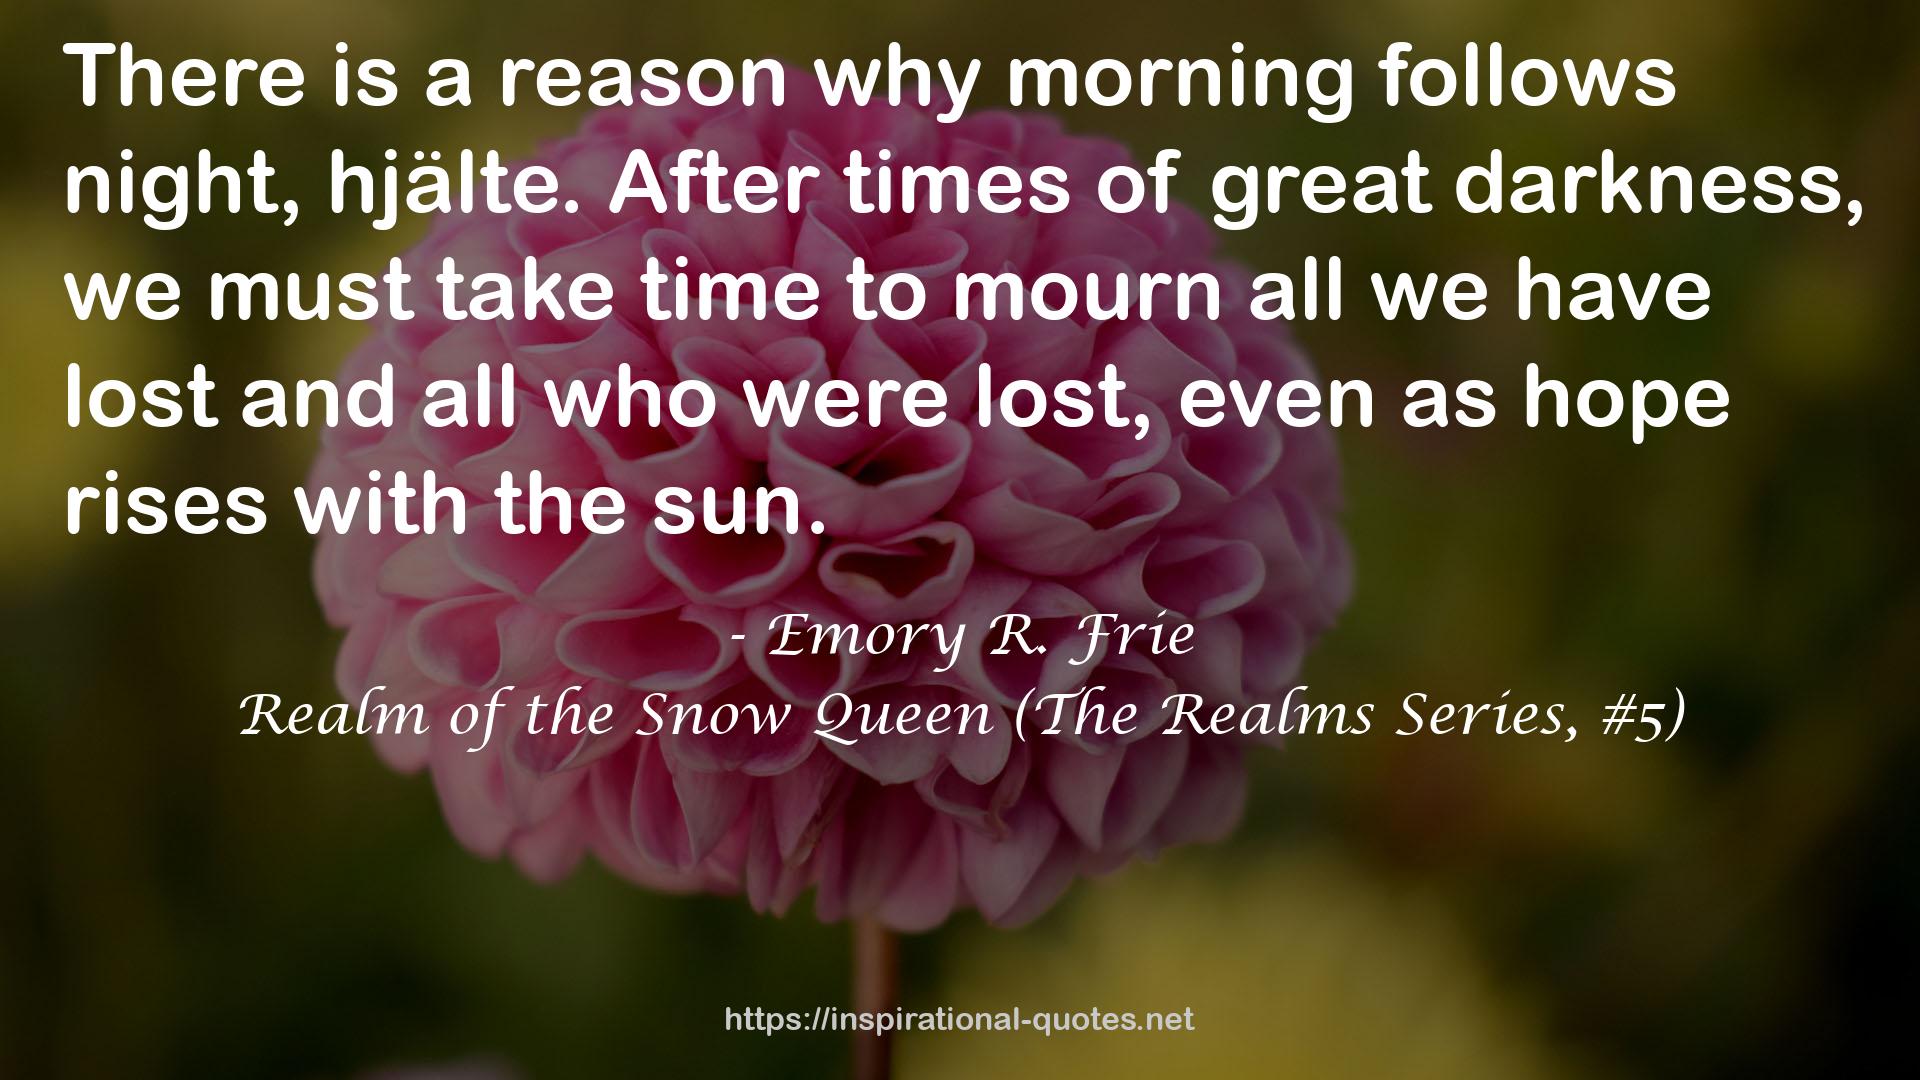 Realm of the Snow Queen (The Realms Series, #5) QUOTES